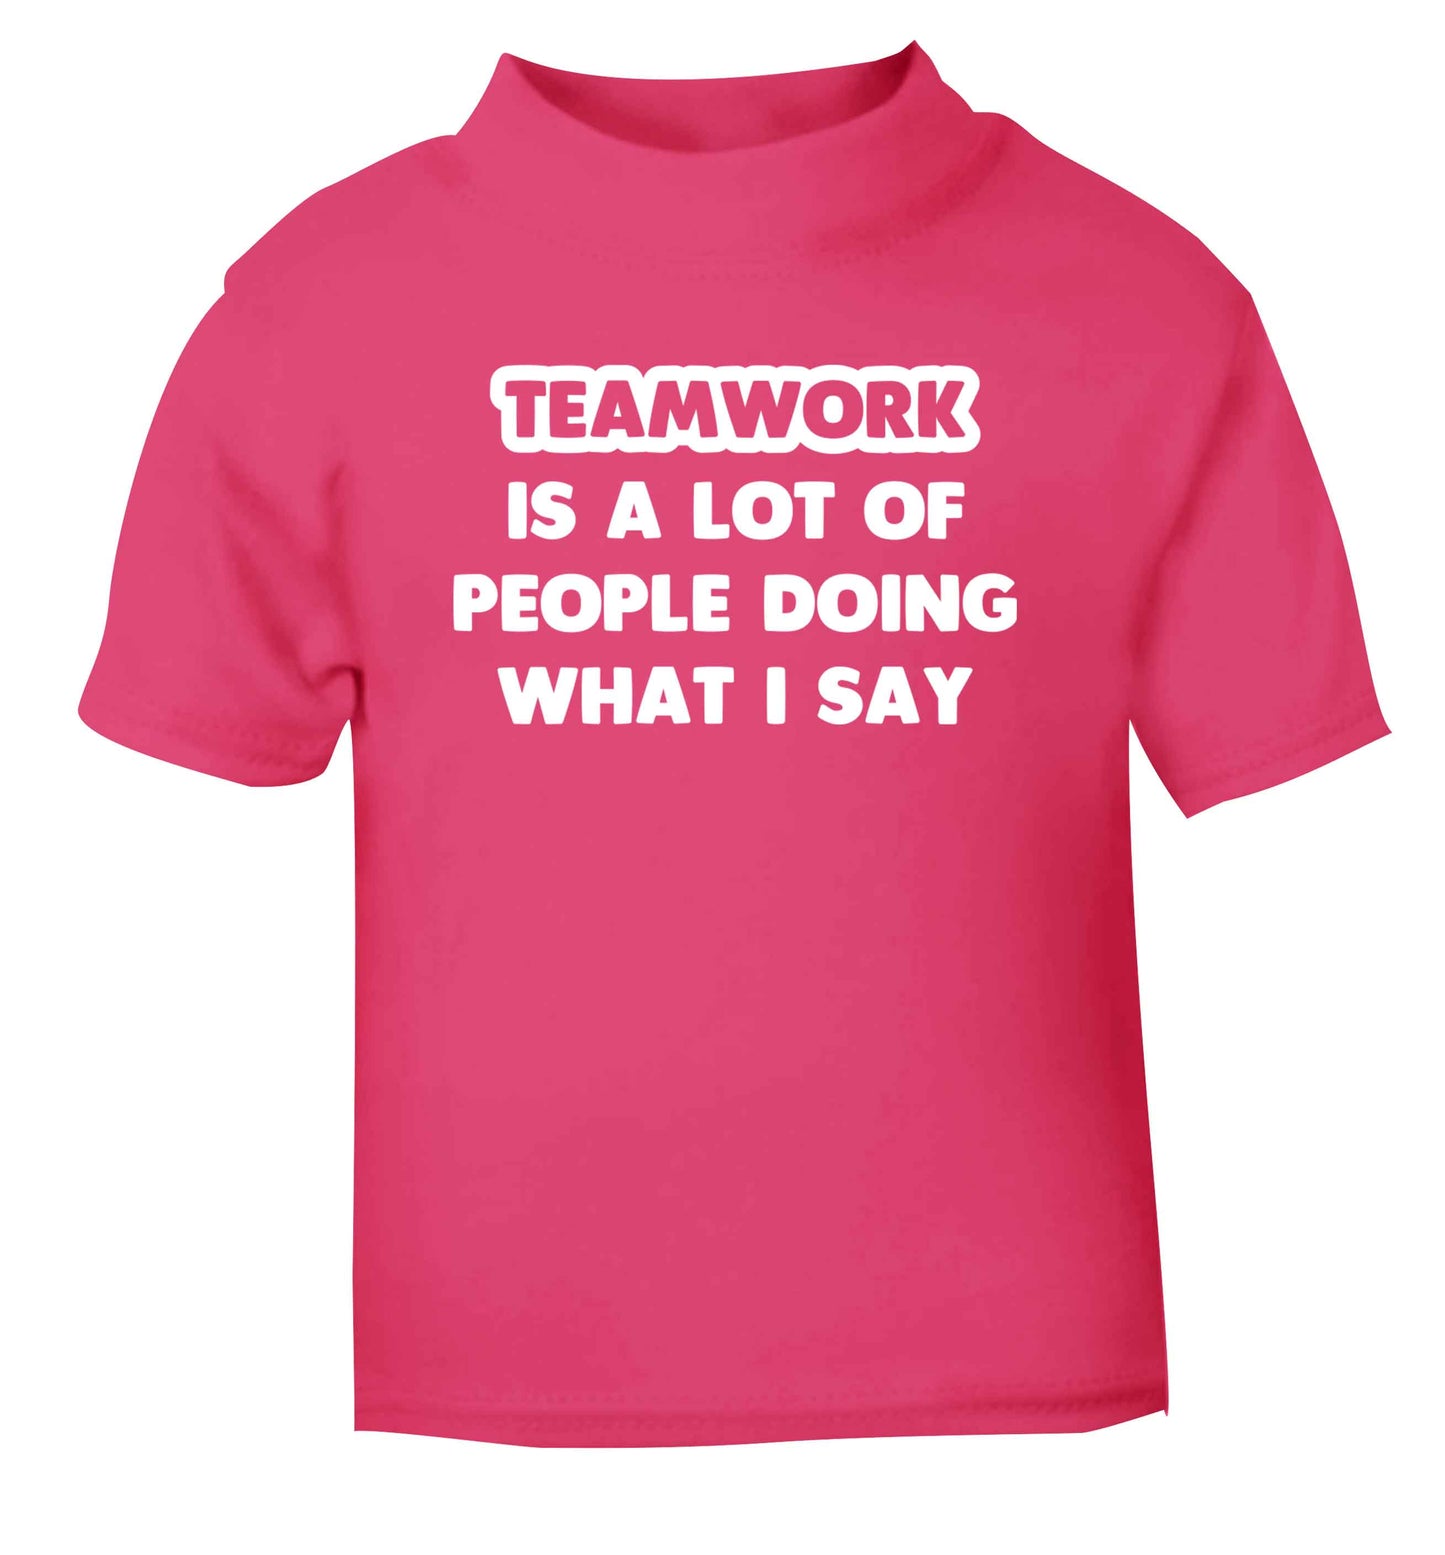 Teamwork is a lot of people doing what I say pink Baby Toddler Tshirt 2 Years